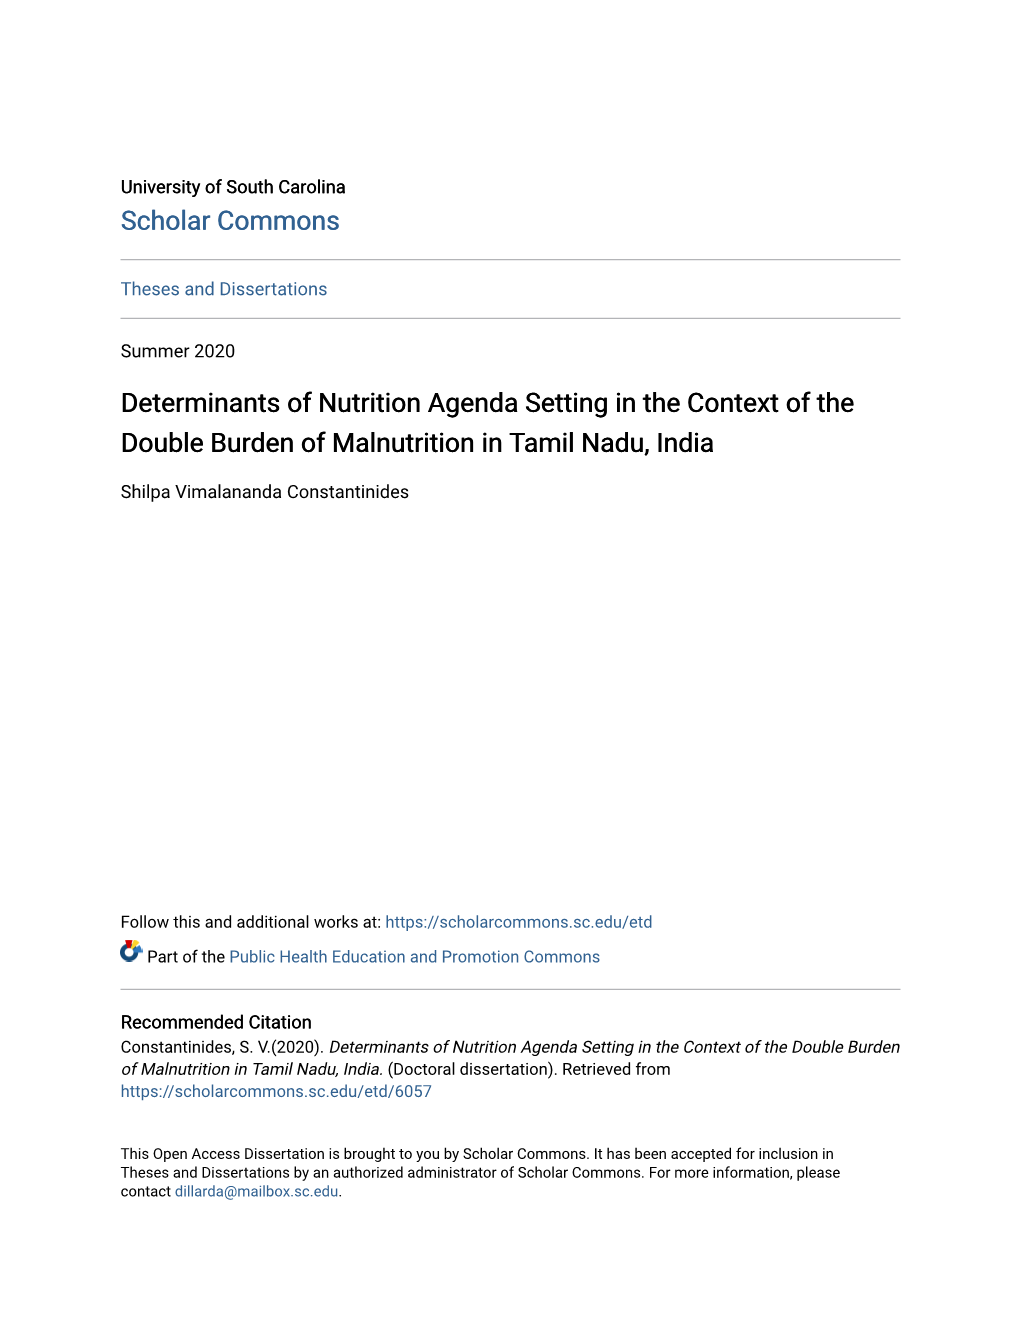 Determinants of Nutrition Agenda Setting in the Context of the Double Burden of Malnutrition in Tamil Nadu, India